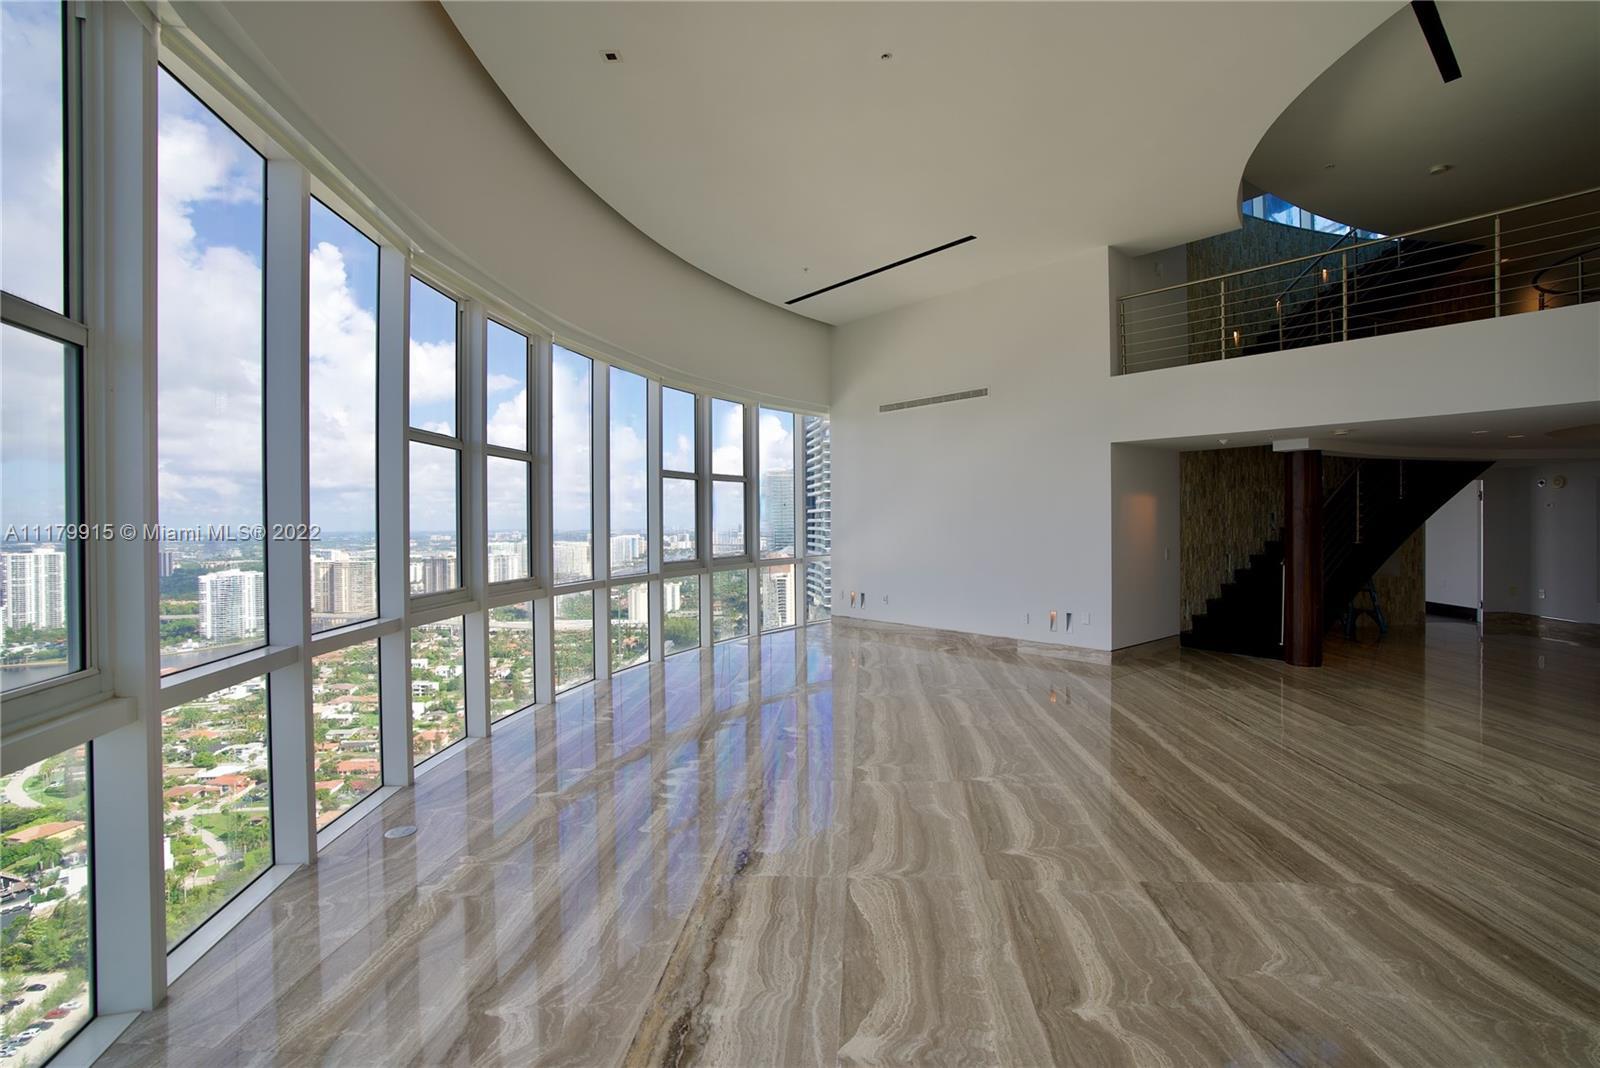 This fantastic PH on the 55th floor has a living room with soaring 22-foot ceilings, a one-of-a-kind